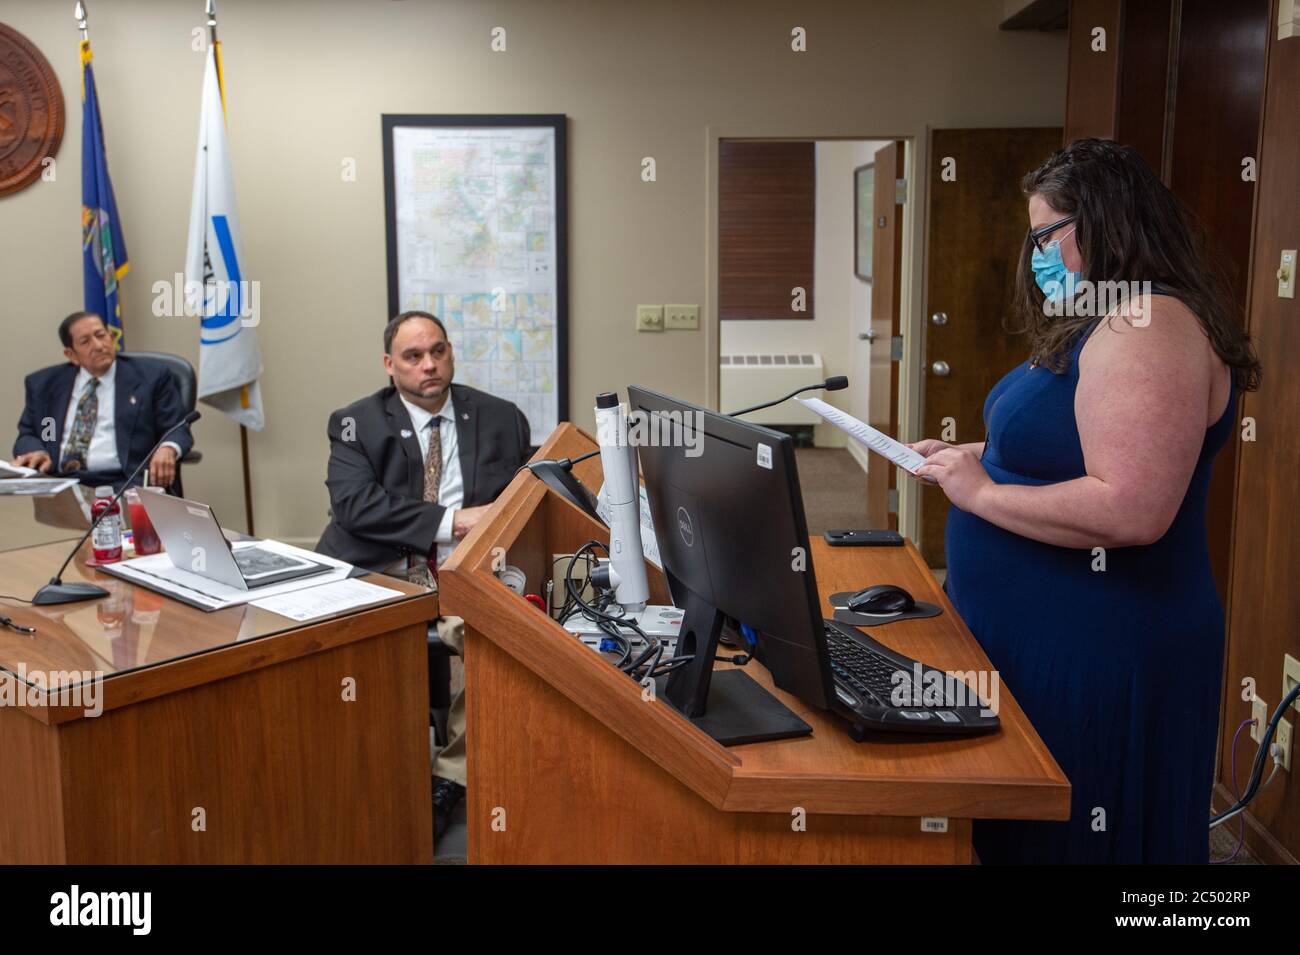 Manhattan, Kansas, USA. 29th June, 2020. KAYLEE PROCTOR, right, speaks to the Riley County Commission on Monday. PROCTOR, and other community members addressed the commission regarding community masking and racial tensions within the county. Credit: Luke Townsend/ZUMA Wire/Alamy Live News Stock Photo